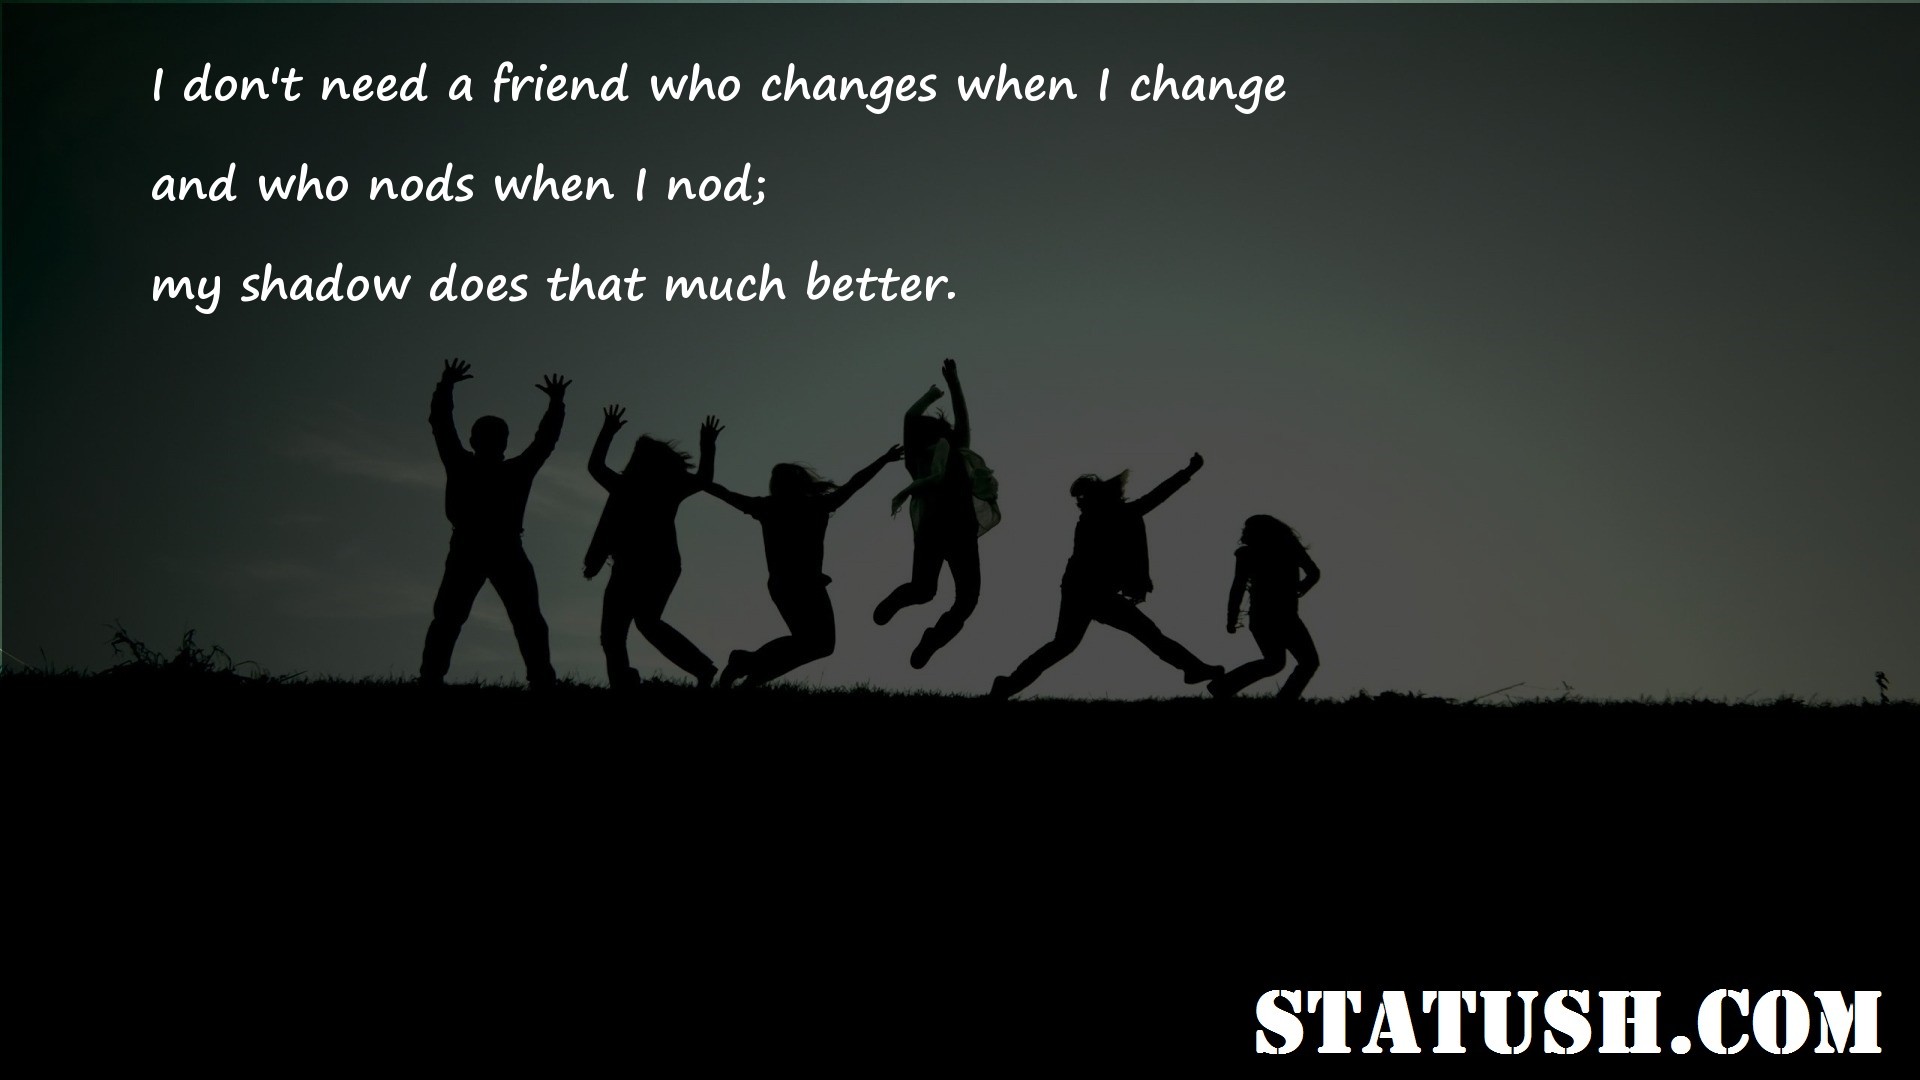 I dont need a friend who changes when I change - Friendship Quotes at statush.com